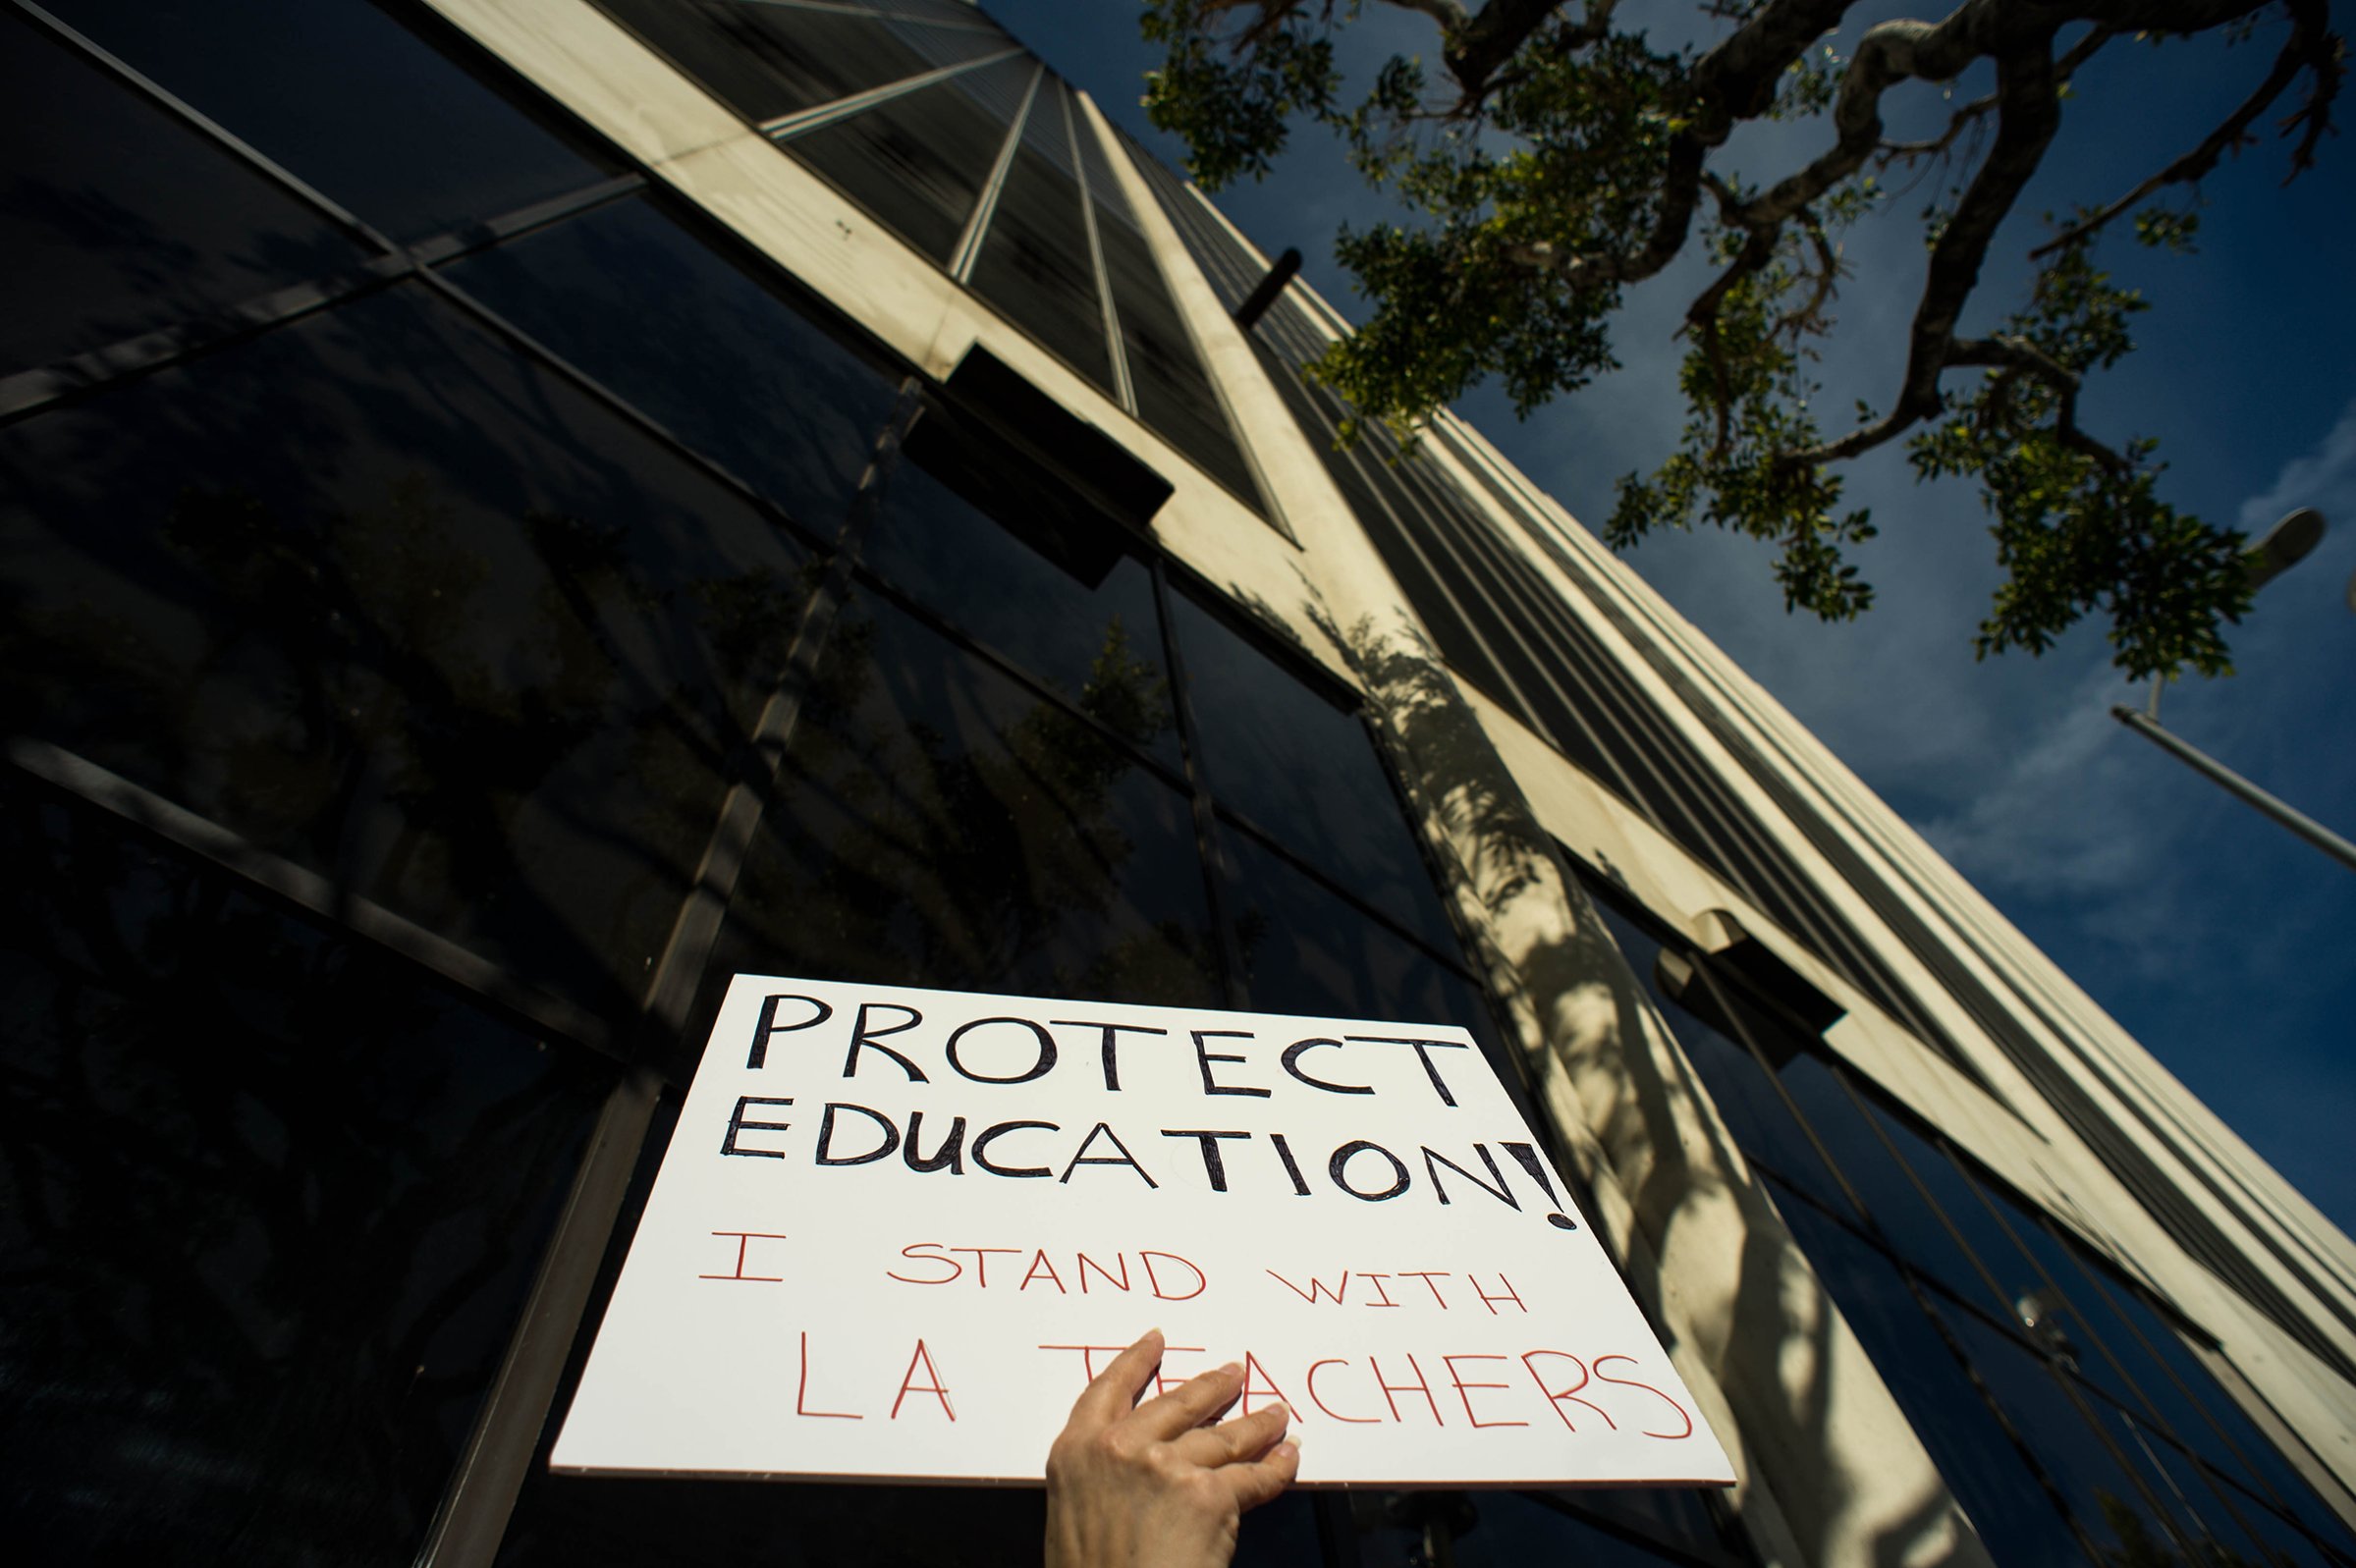 "I'm advocating for my children and I believe in what the teachers are asking for will benefit my children so I support my teachers," says Los Angeles Unified School District parent Kristie Vogel as she waits to get into the LAUSD School Board meeting in Los Angeles on Tuesday, January 8, 2019.